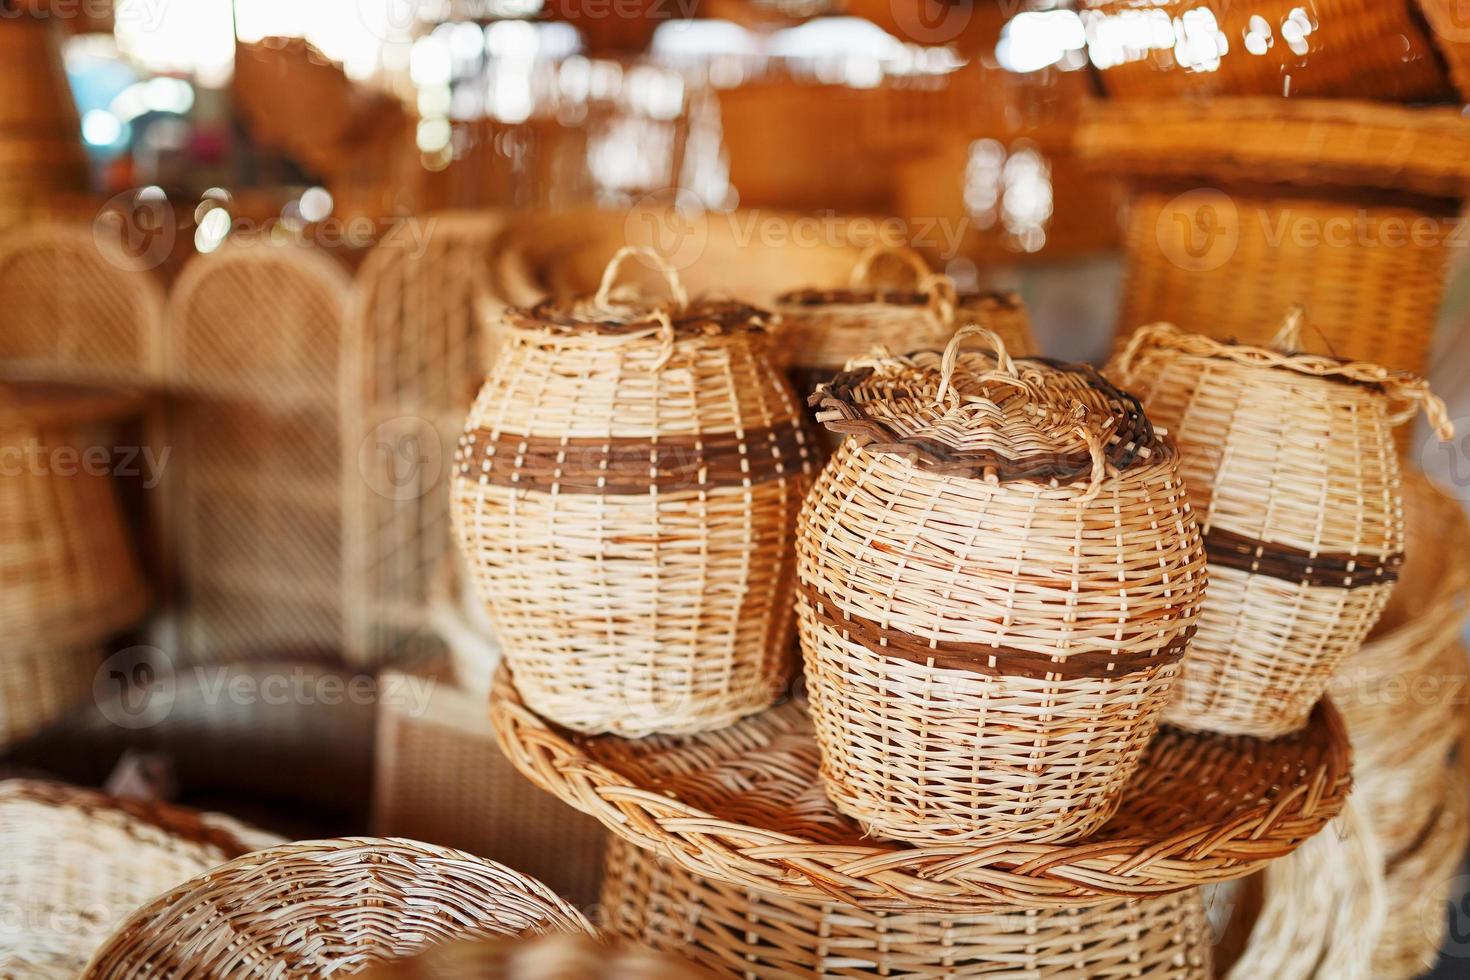 Handmade wicker baskets, items and souvenirs at the street craft market photo